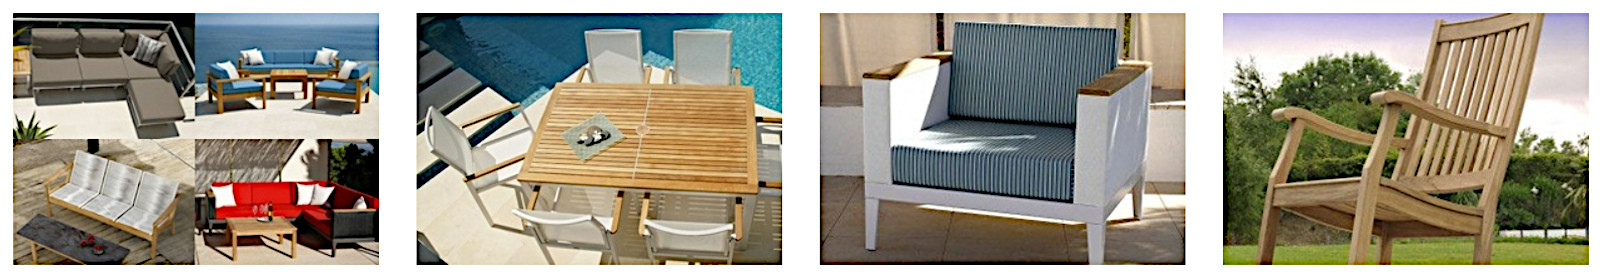 Low-priced premium Barlow Tyrie outdoor furniture